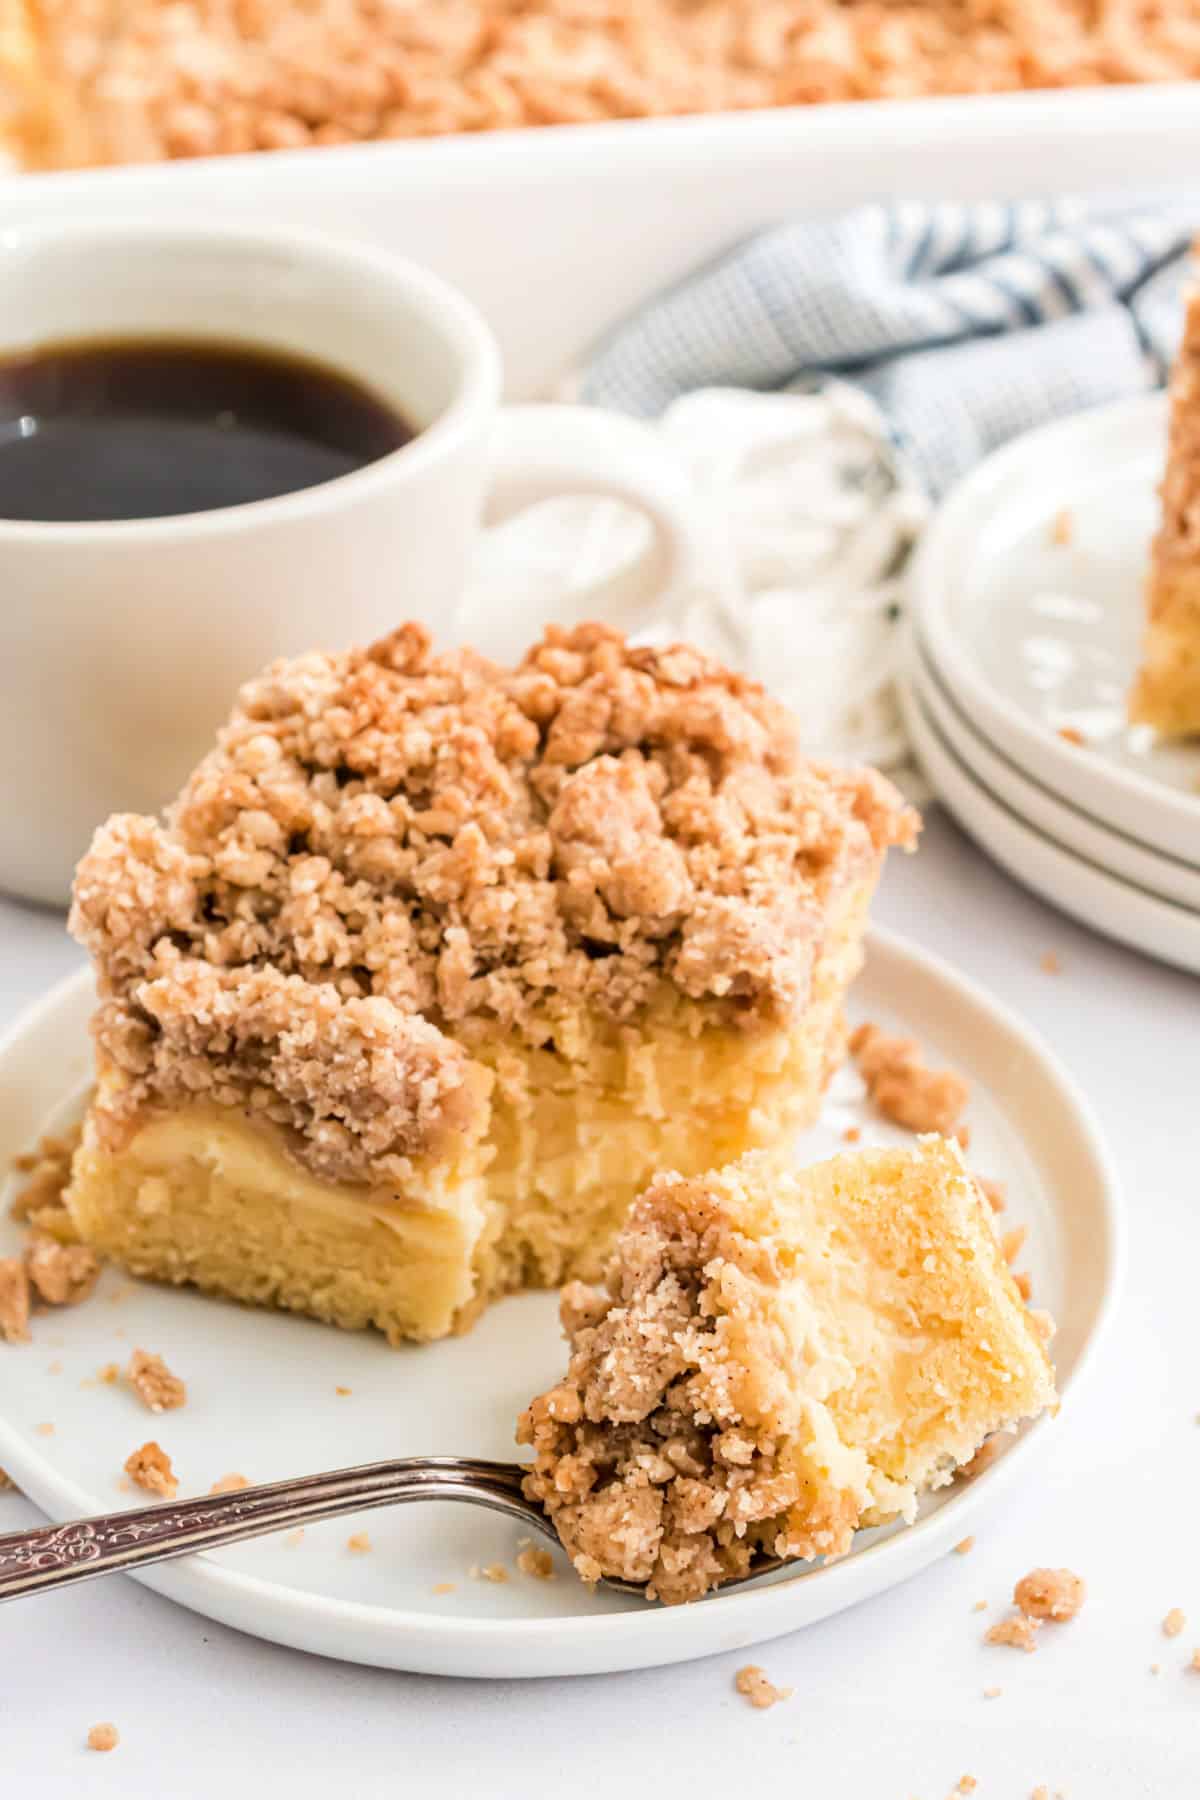 Slice of coffee cake with a fork taking a bite.